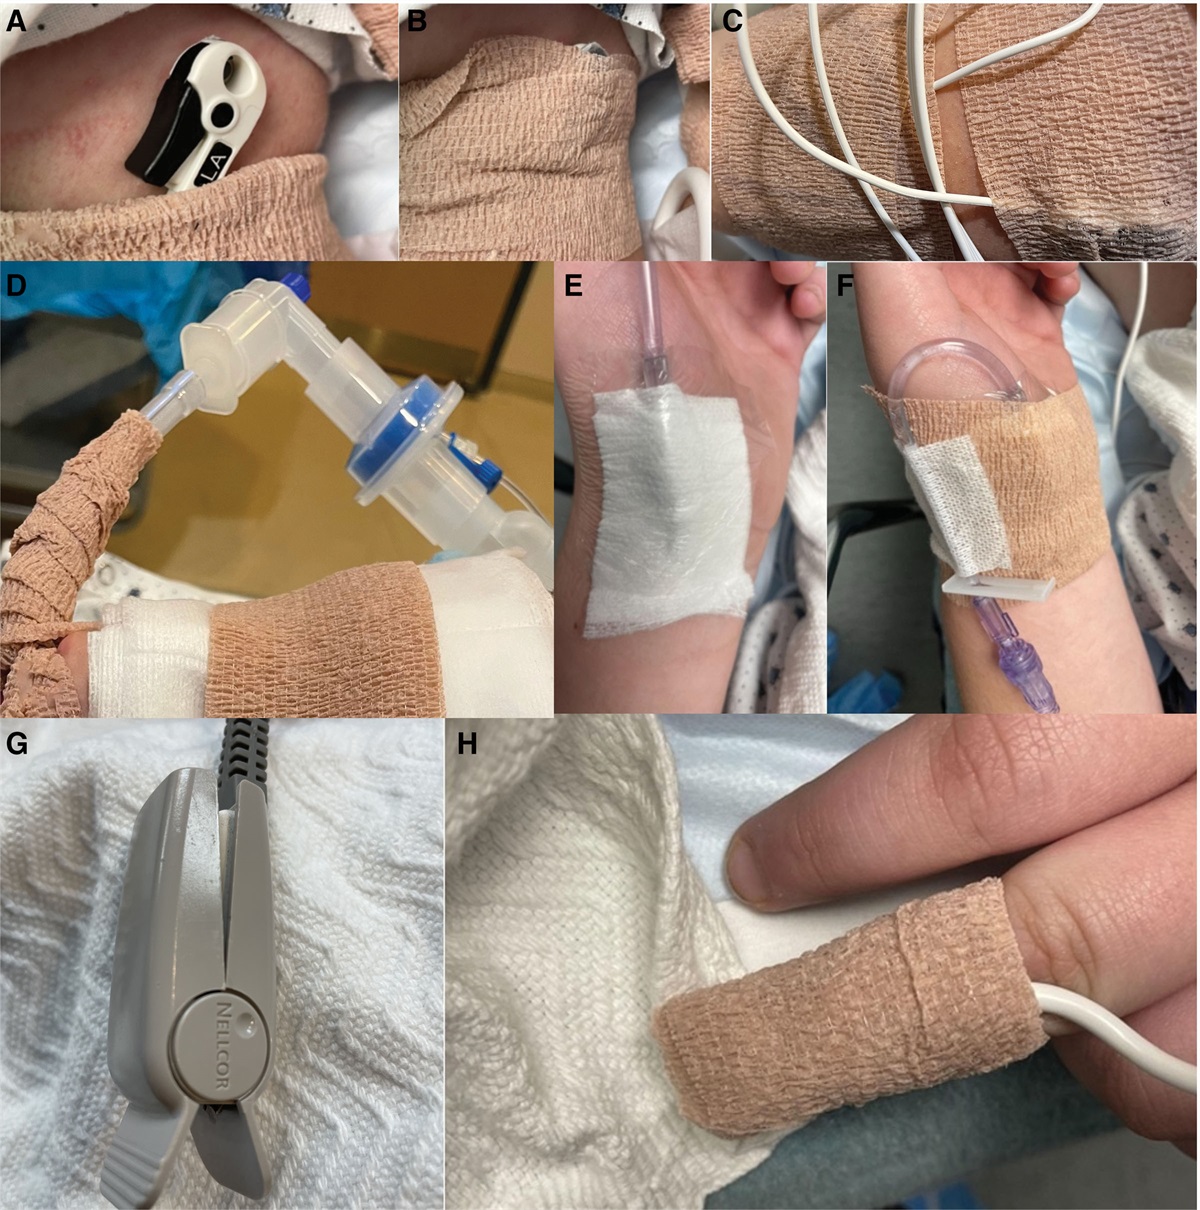 Utilizing Cohesive Bandage to Prevent Adverse Effects of Bleomycin Sclerotherapy: A Case Report